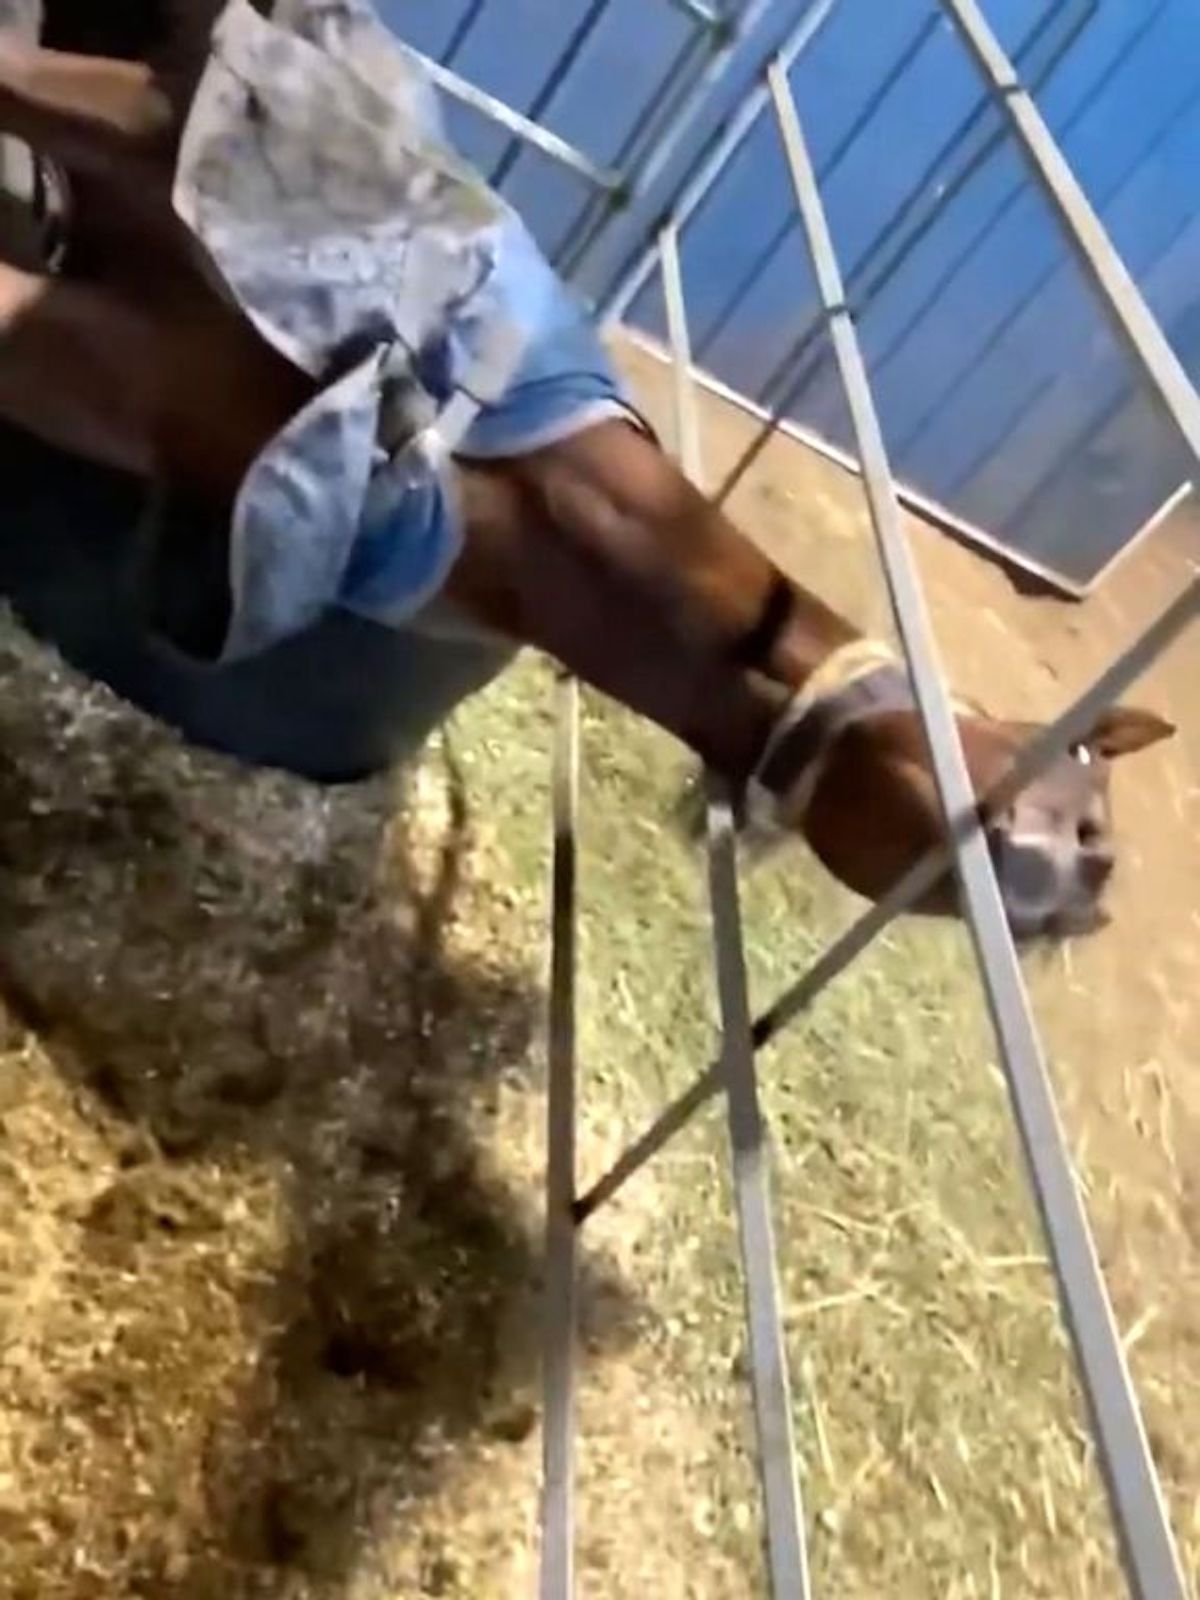 Yoda the horse stuck in stable